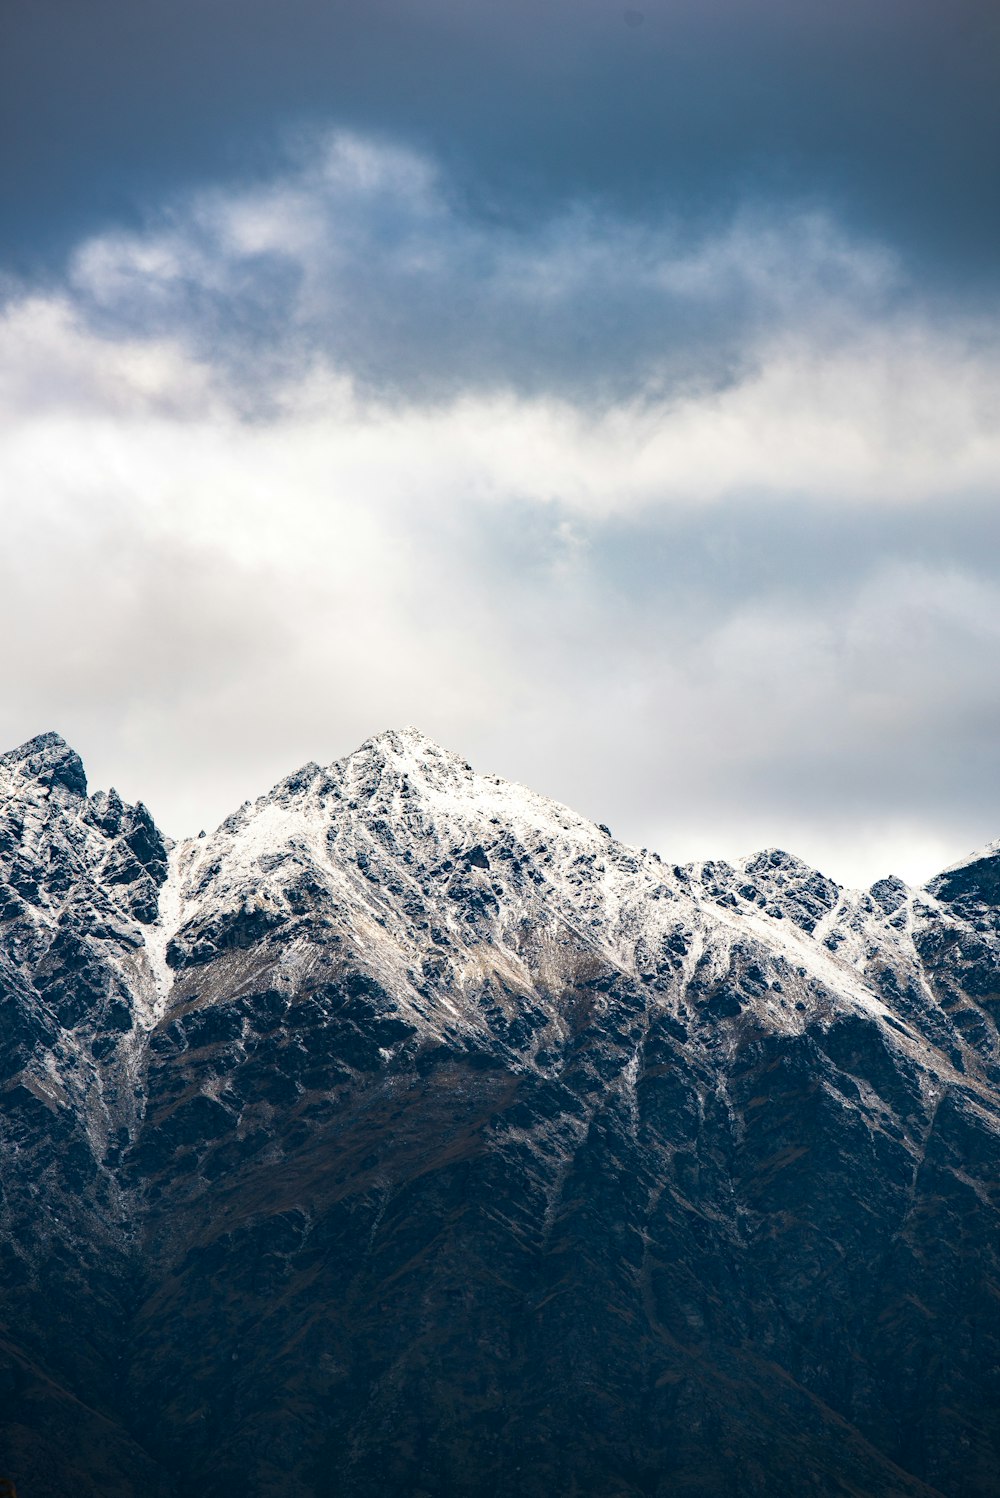 snow-capped mountain below cloudy sky